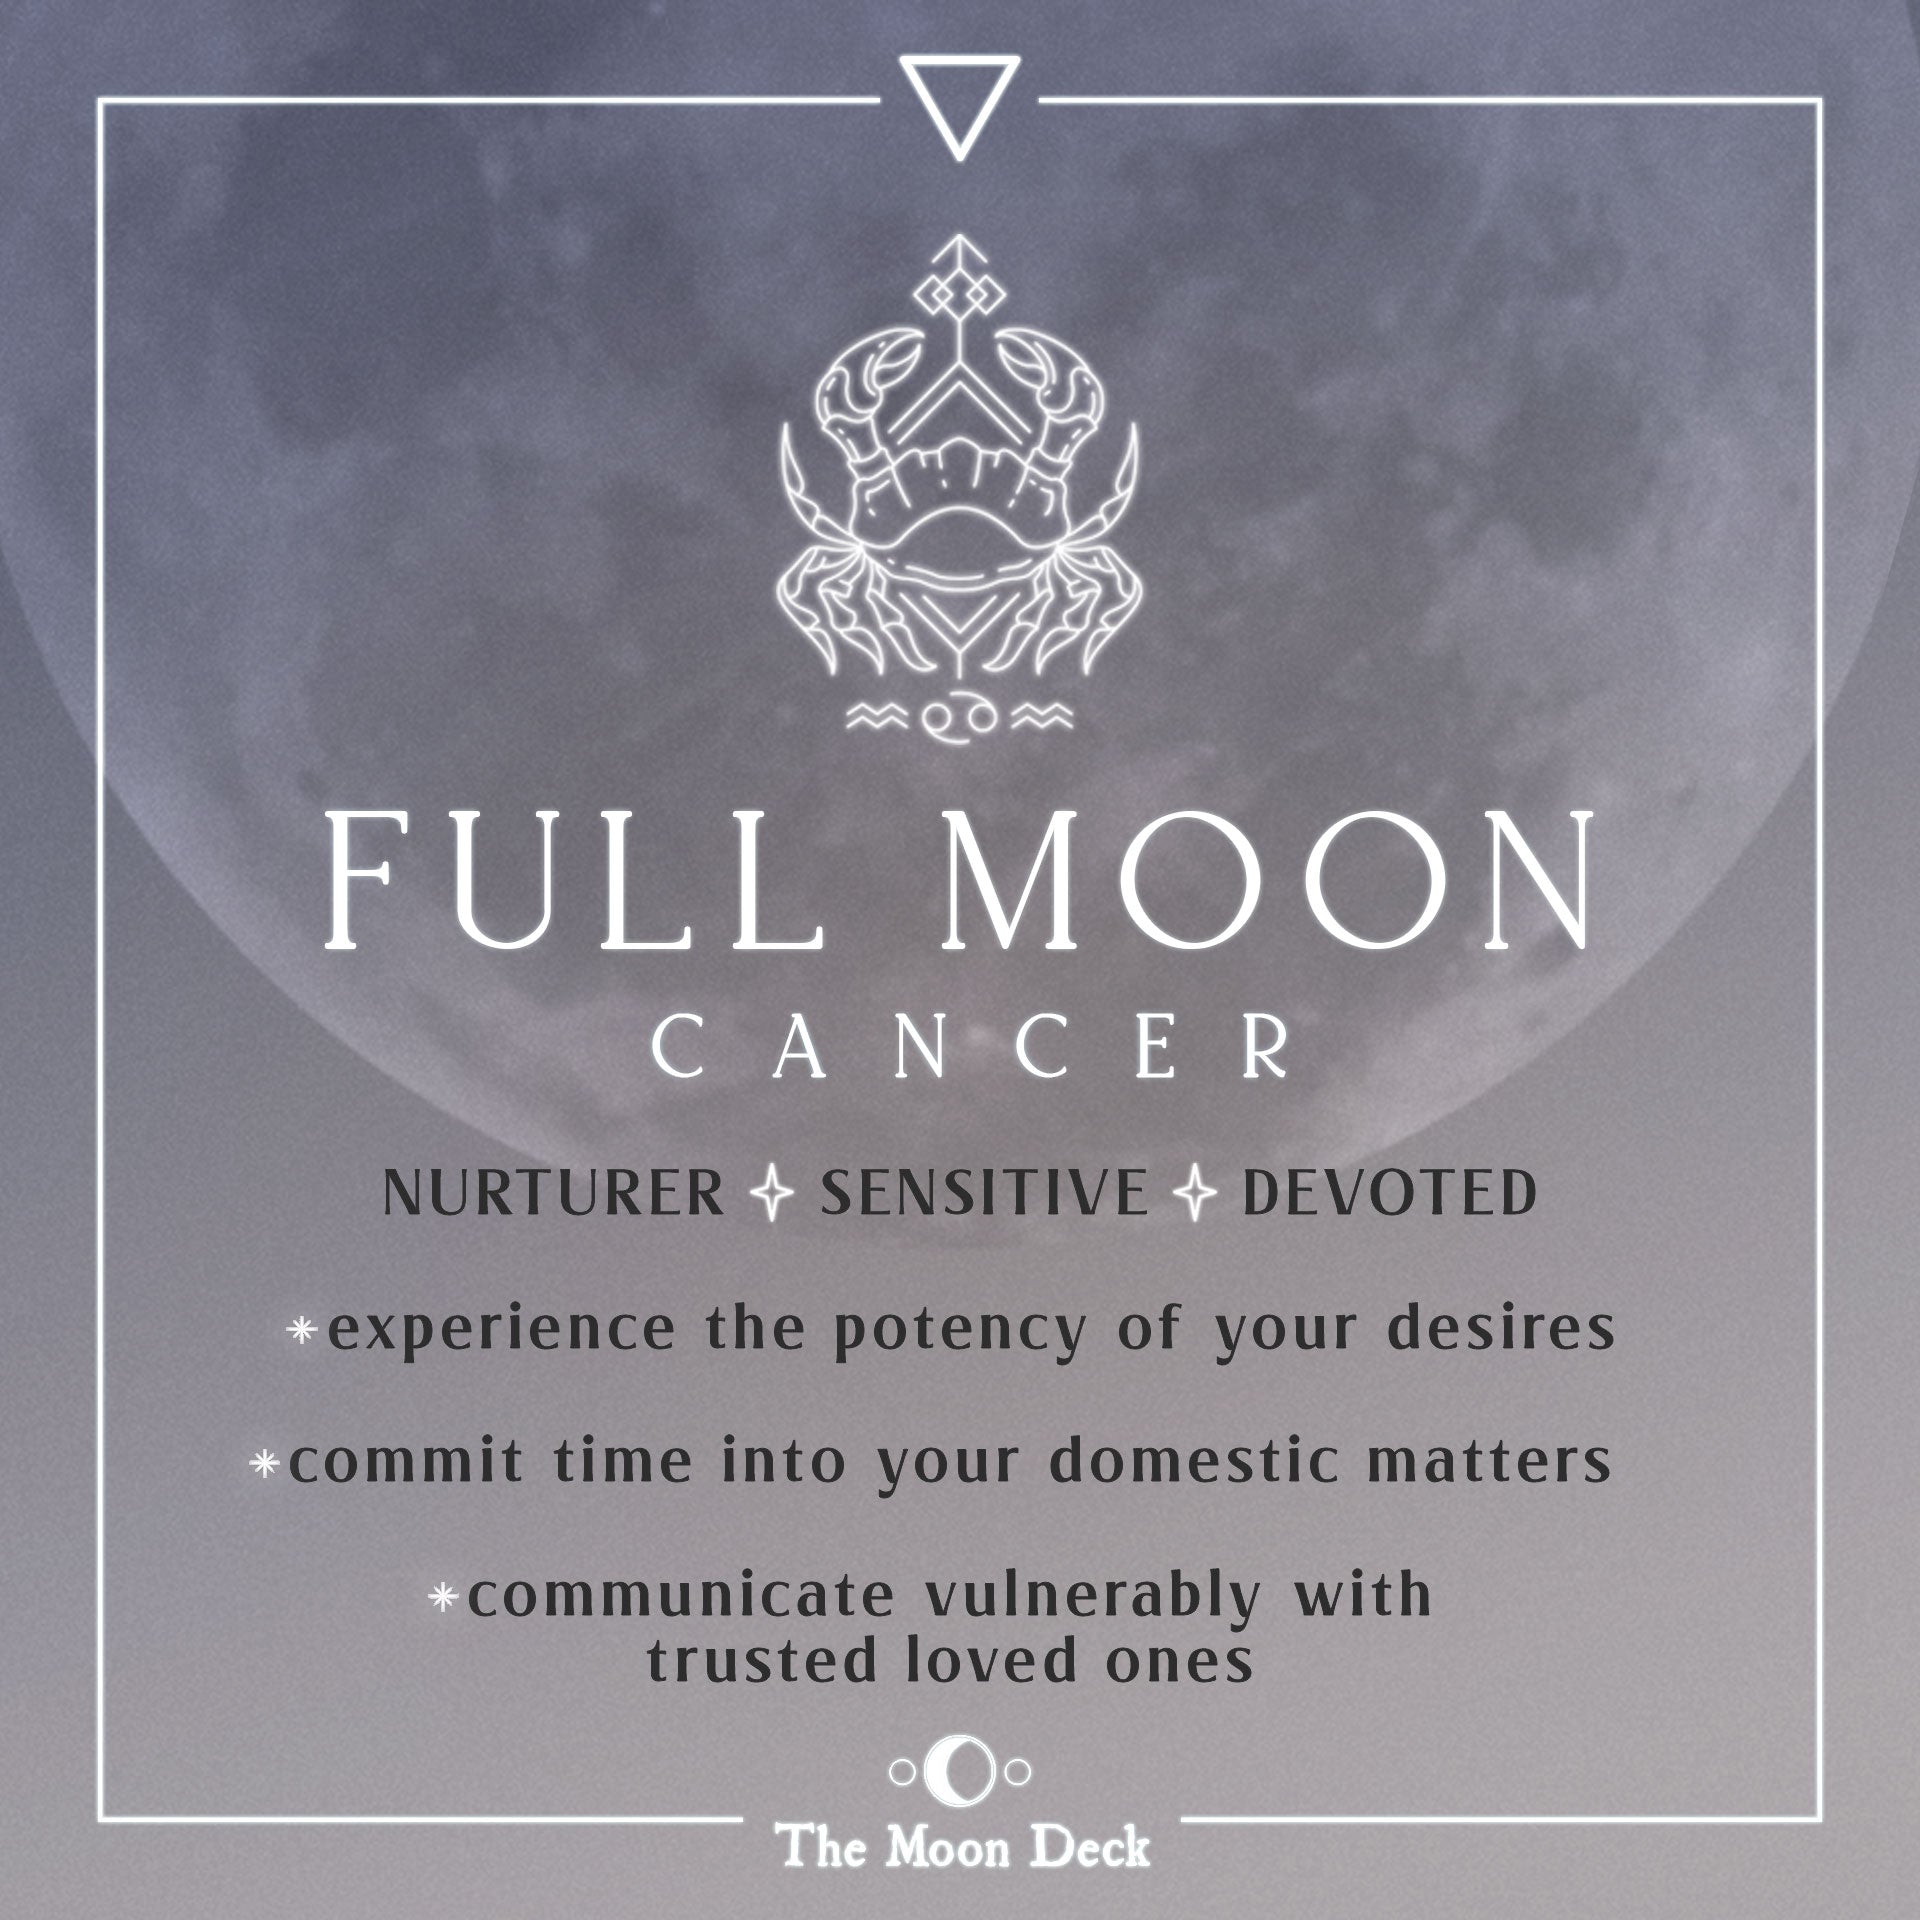 CANCER FULL MOON :: Attune to Your Intuition